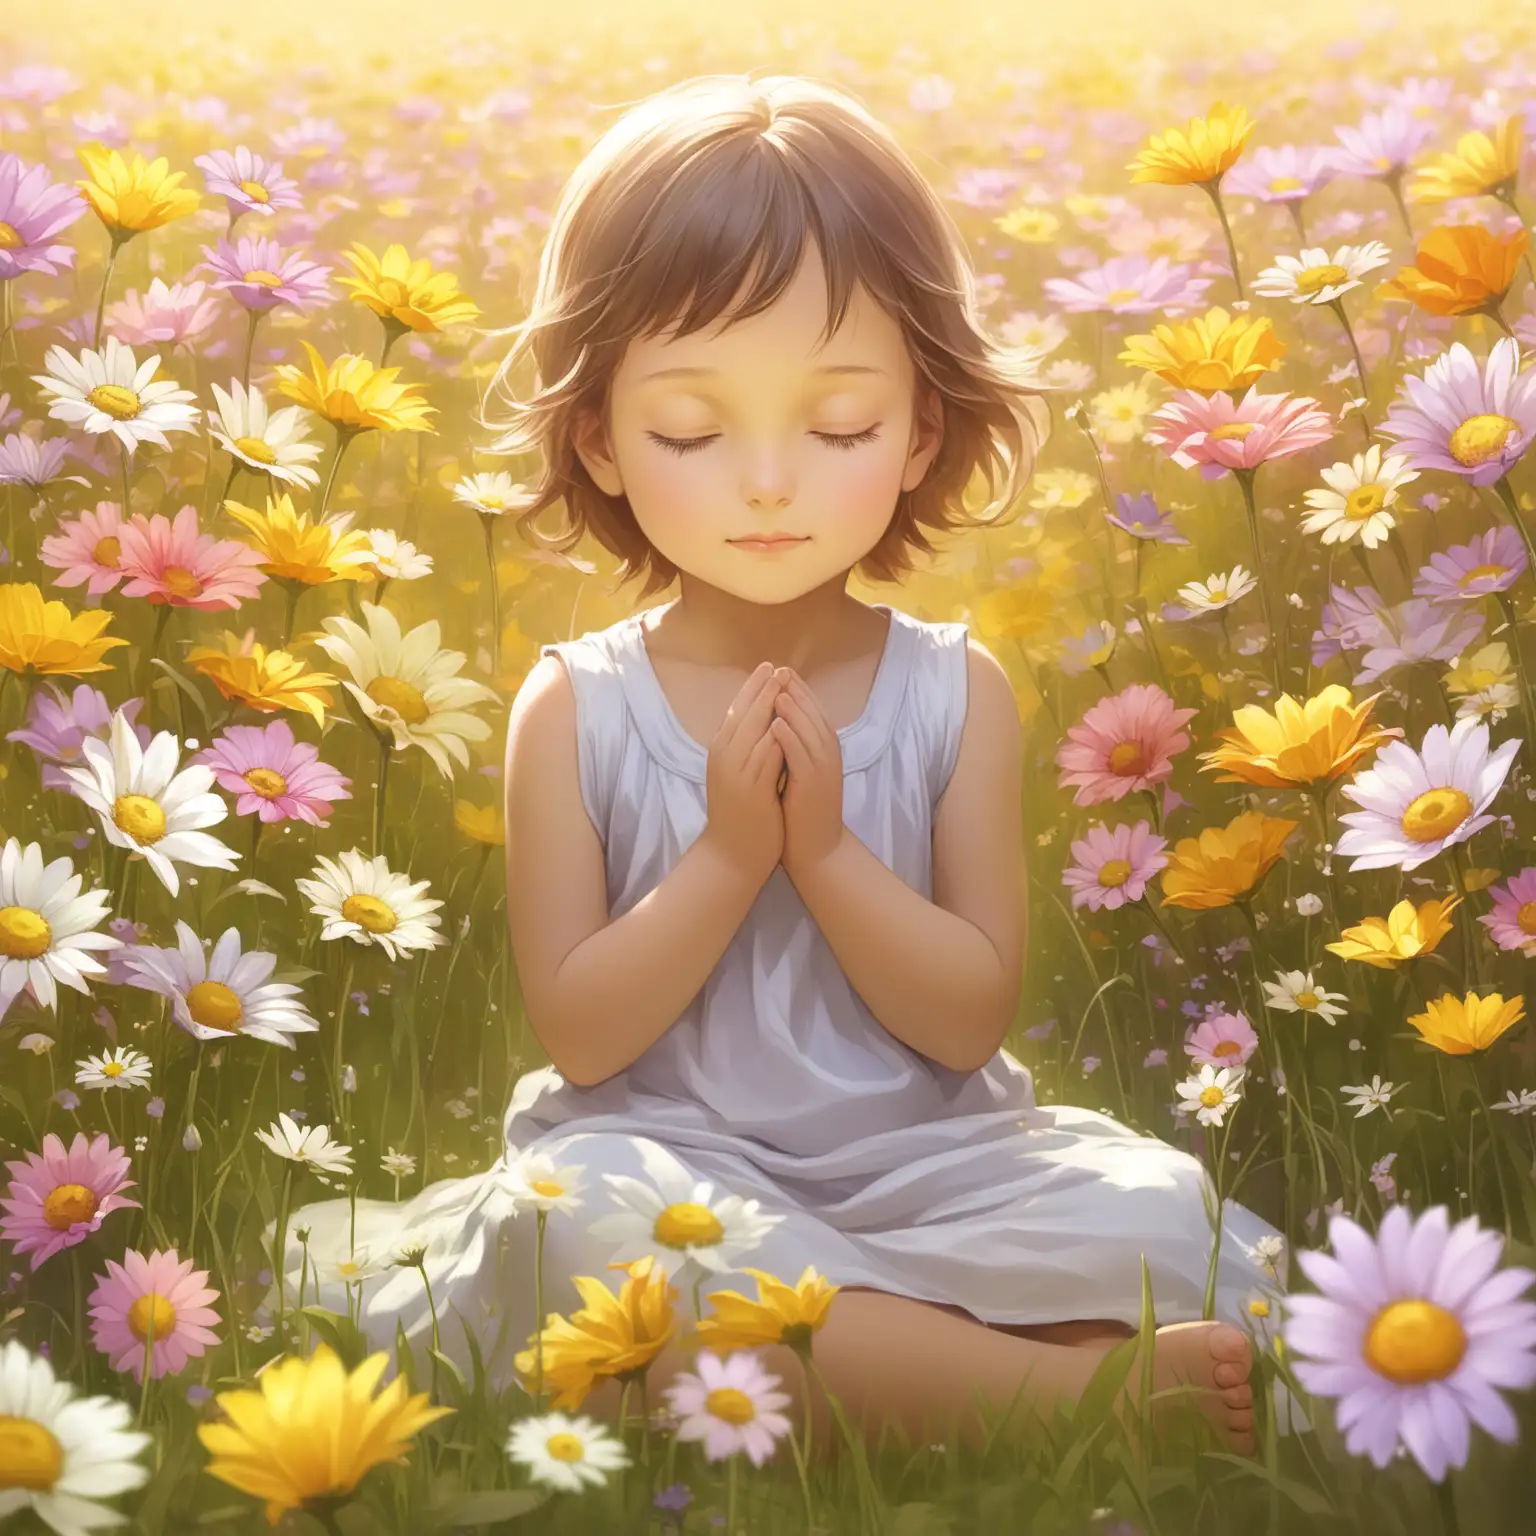 A child sitting in a field of flowers, eyes closed, with a peaceful expression, reflecting on things they are grateful for.